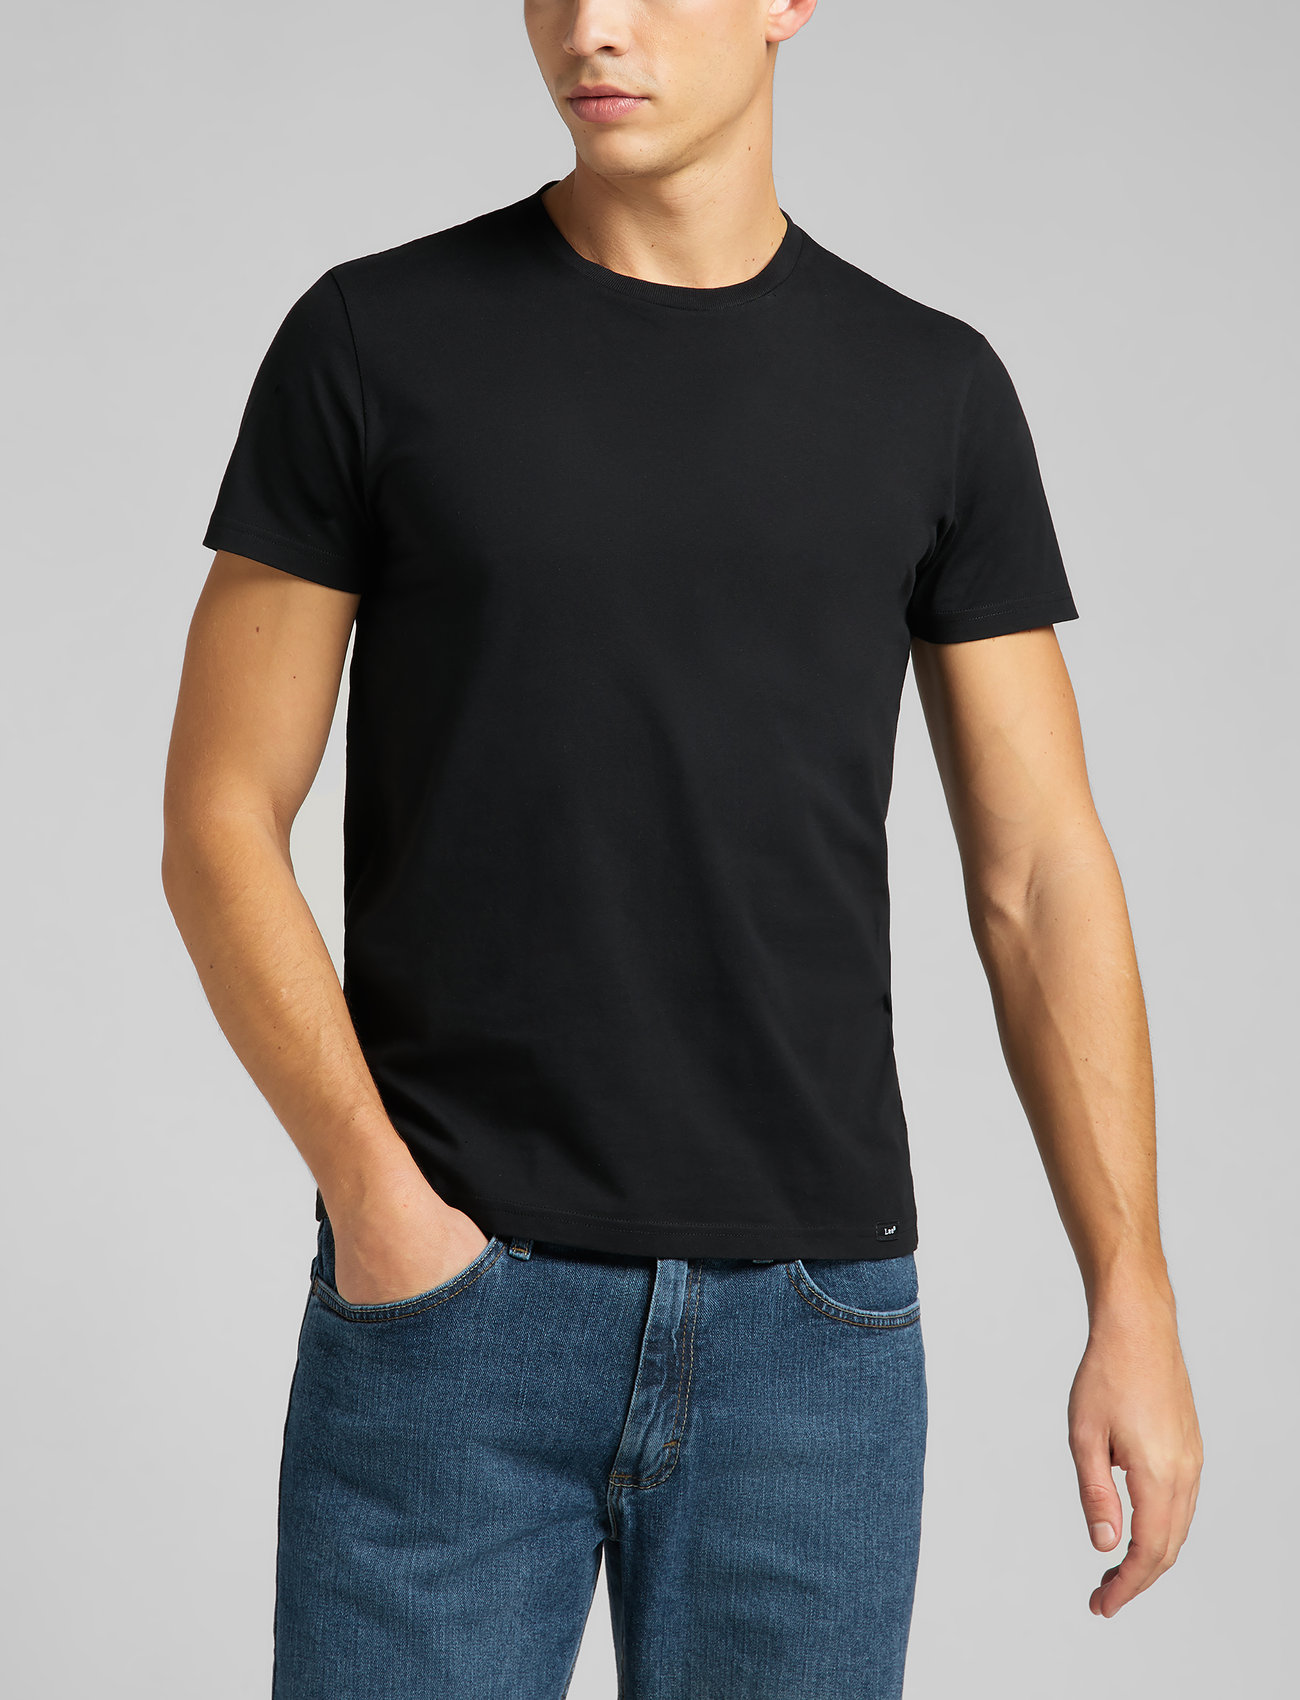 Lee Jeans - TWIN PACK CREW - basic t-shirts - black - 1